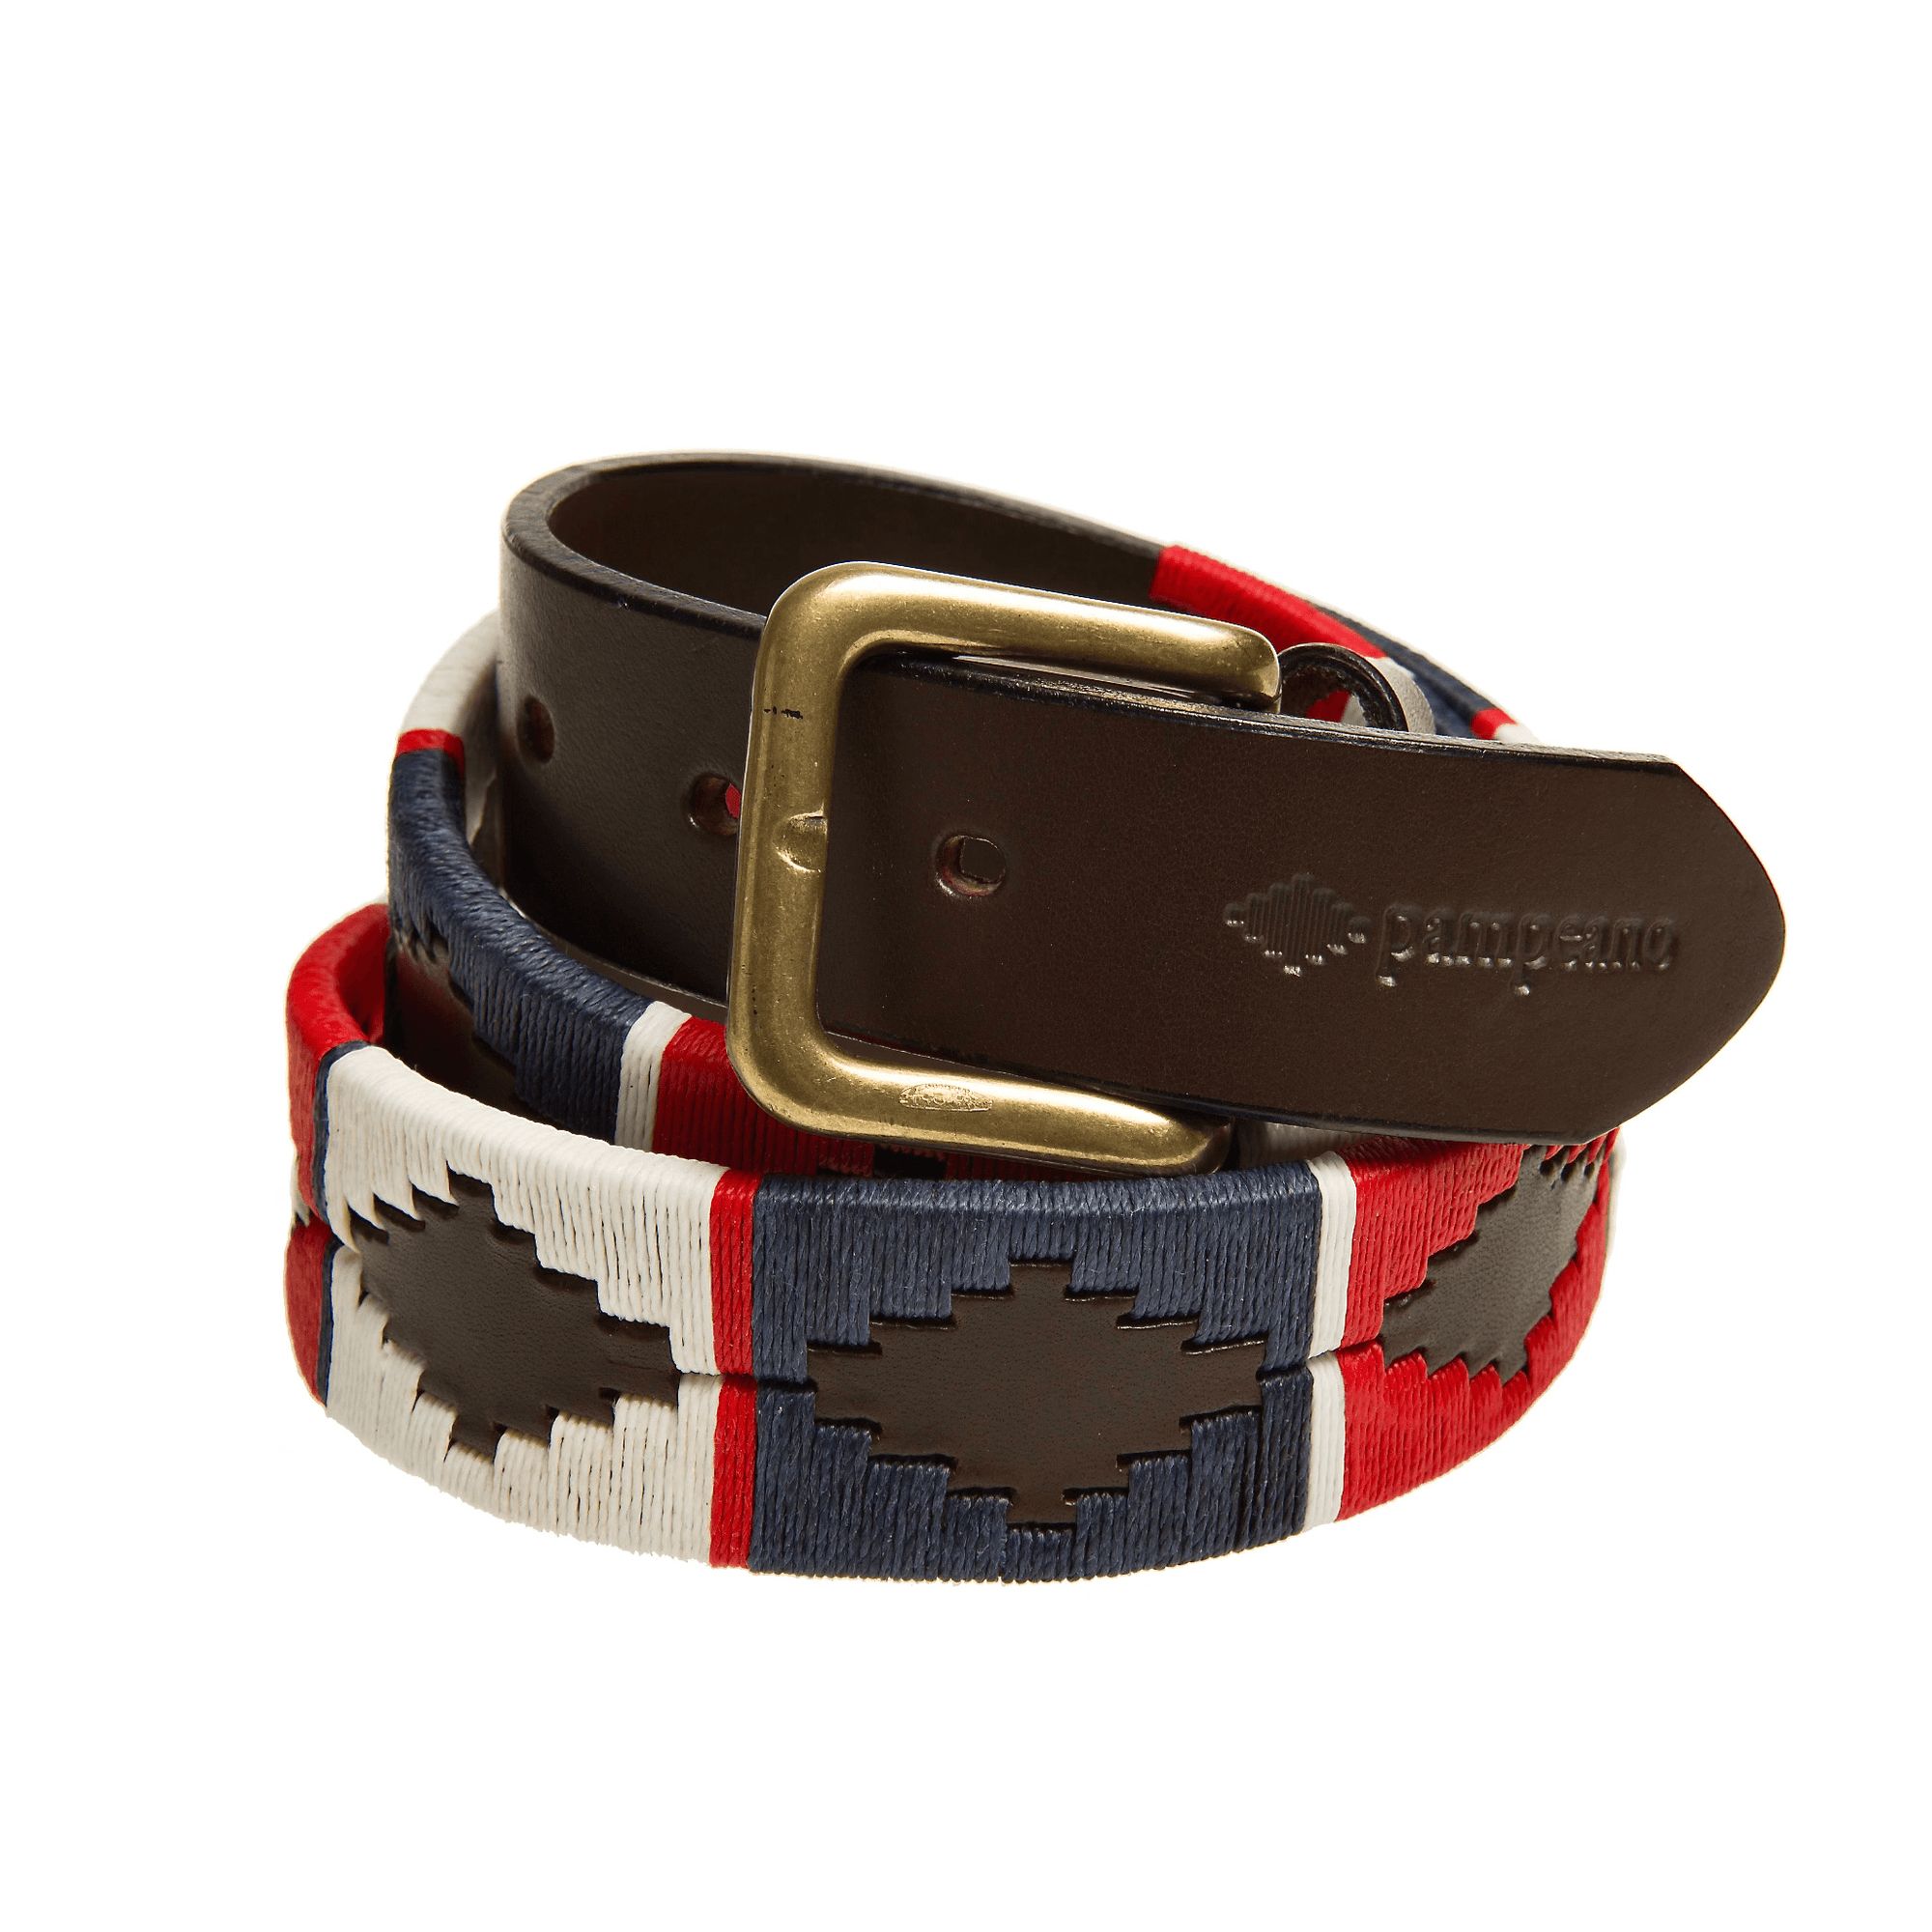 Best Military Polo Belts And Dog Accessories | Darley Lifestyle